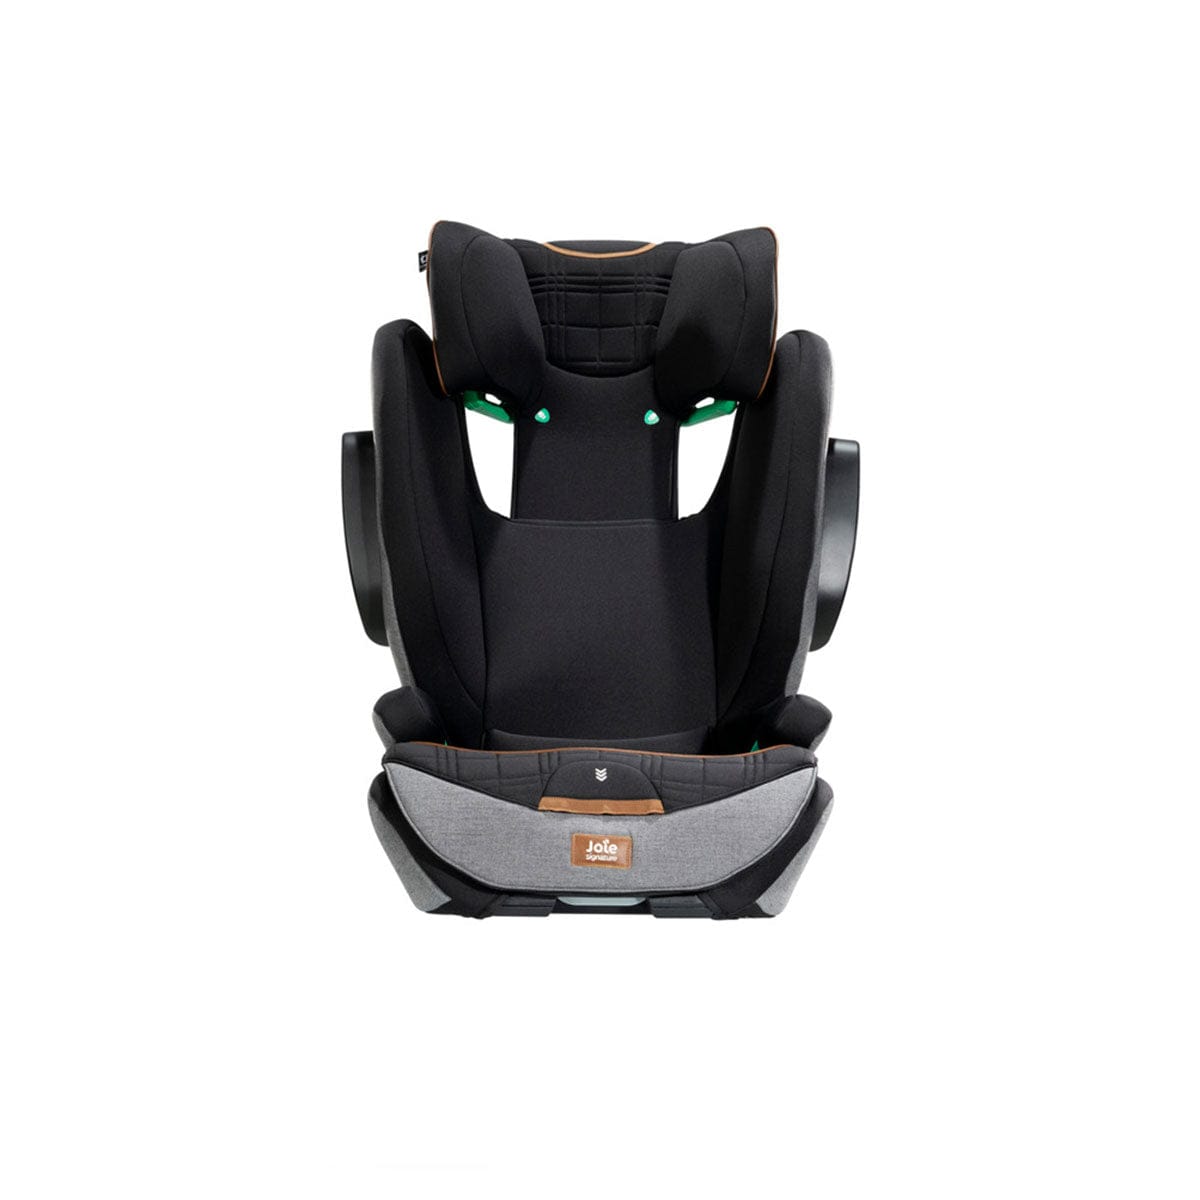 Joie i-Traveller i-Size Car Seat in Carbon Toddler Car Seats C1903ABCBN000 5056080611051